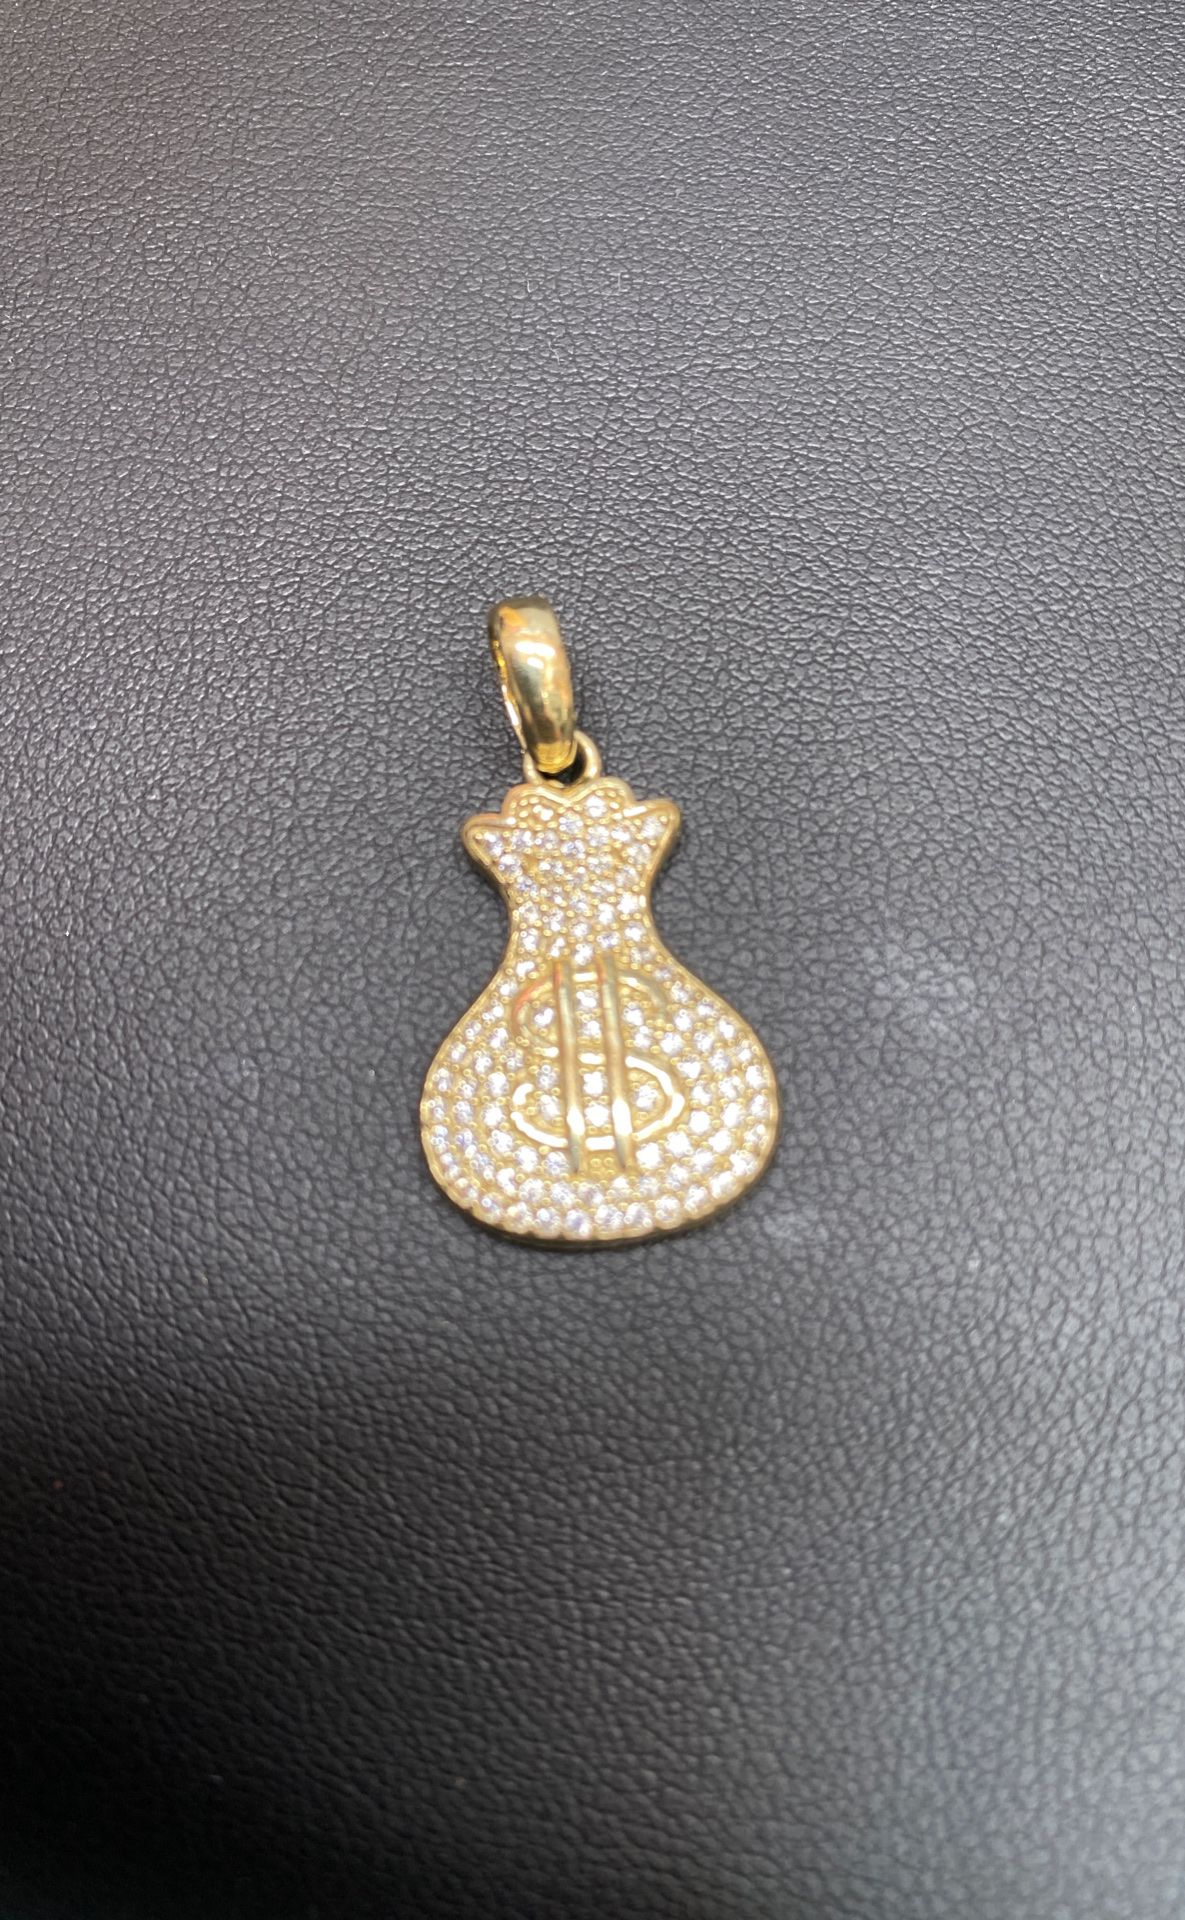 10k real solid gold pendant 1” high